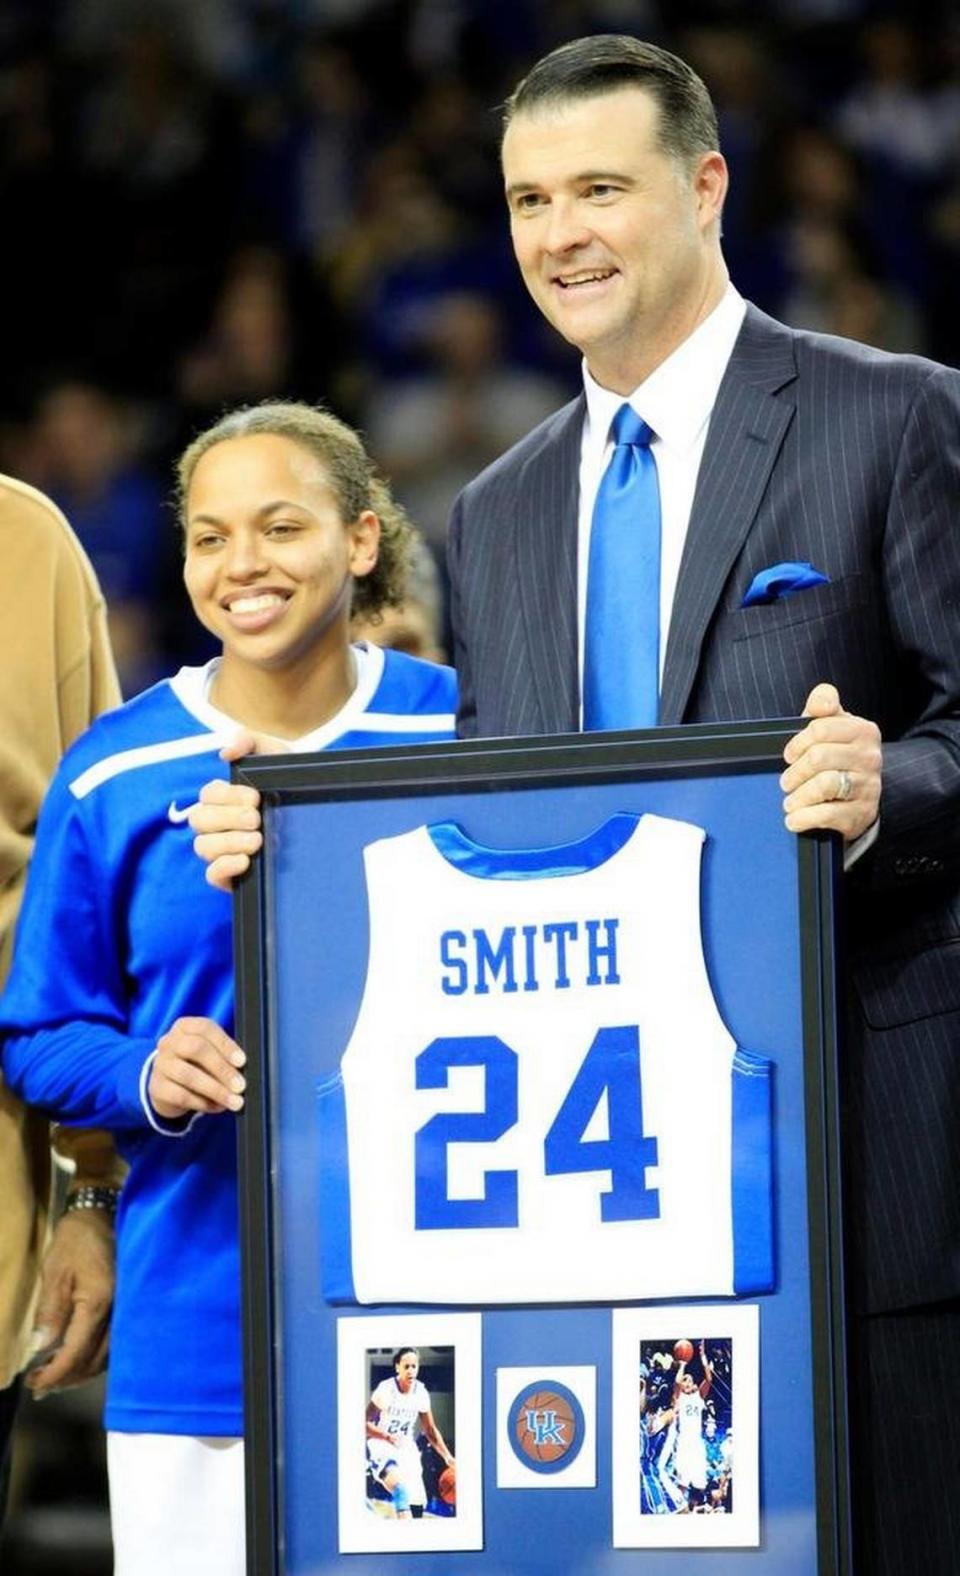 Smith averaged 7.0 points and 3.4 assists per game as a point guard for the Wildcats from 2007-12.